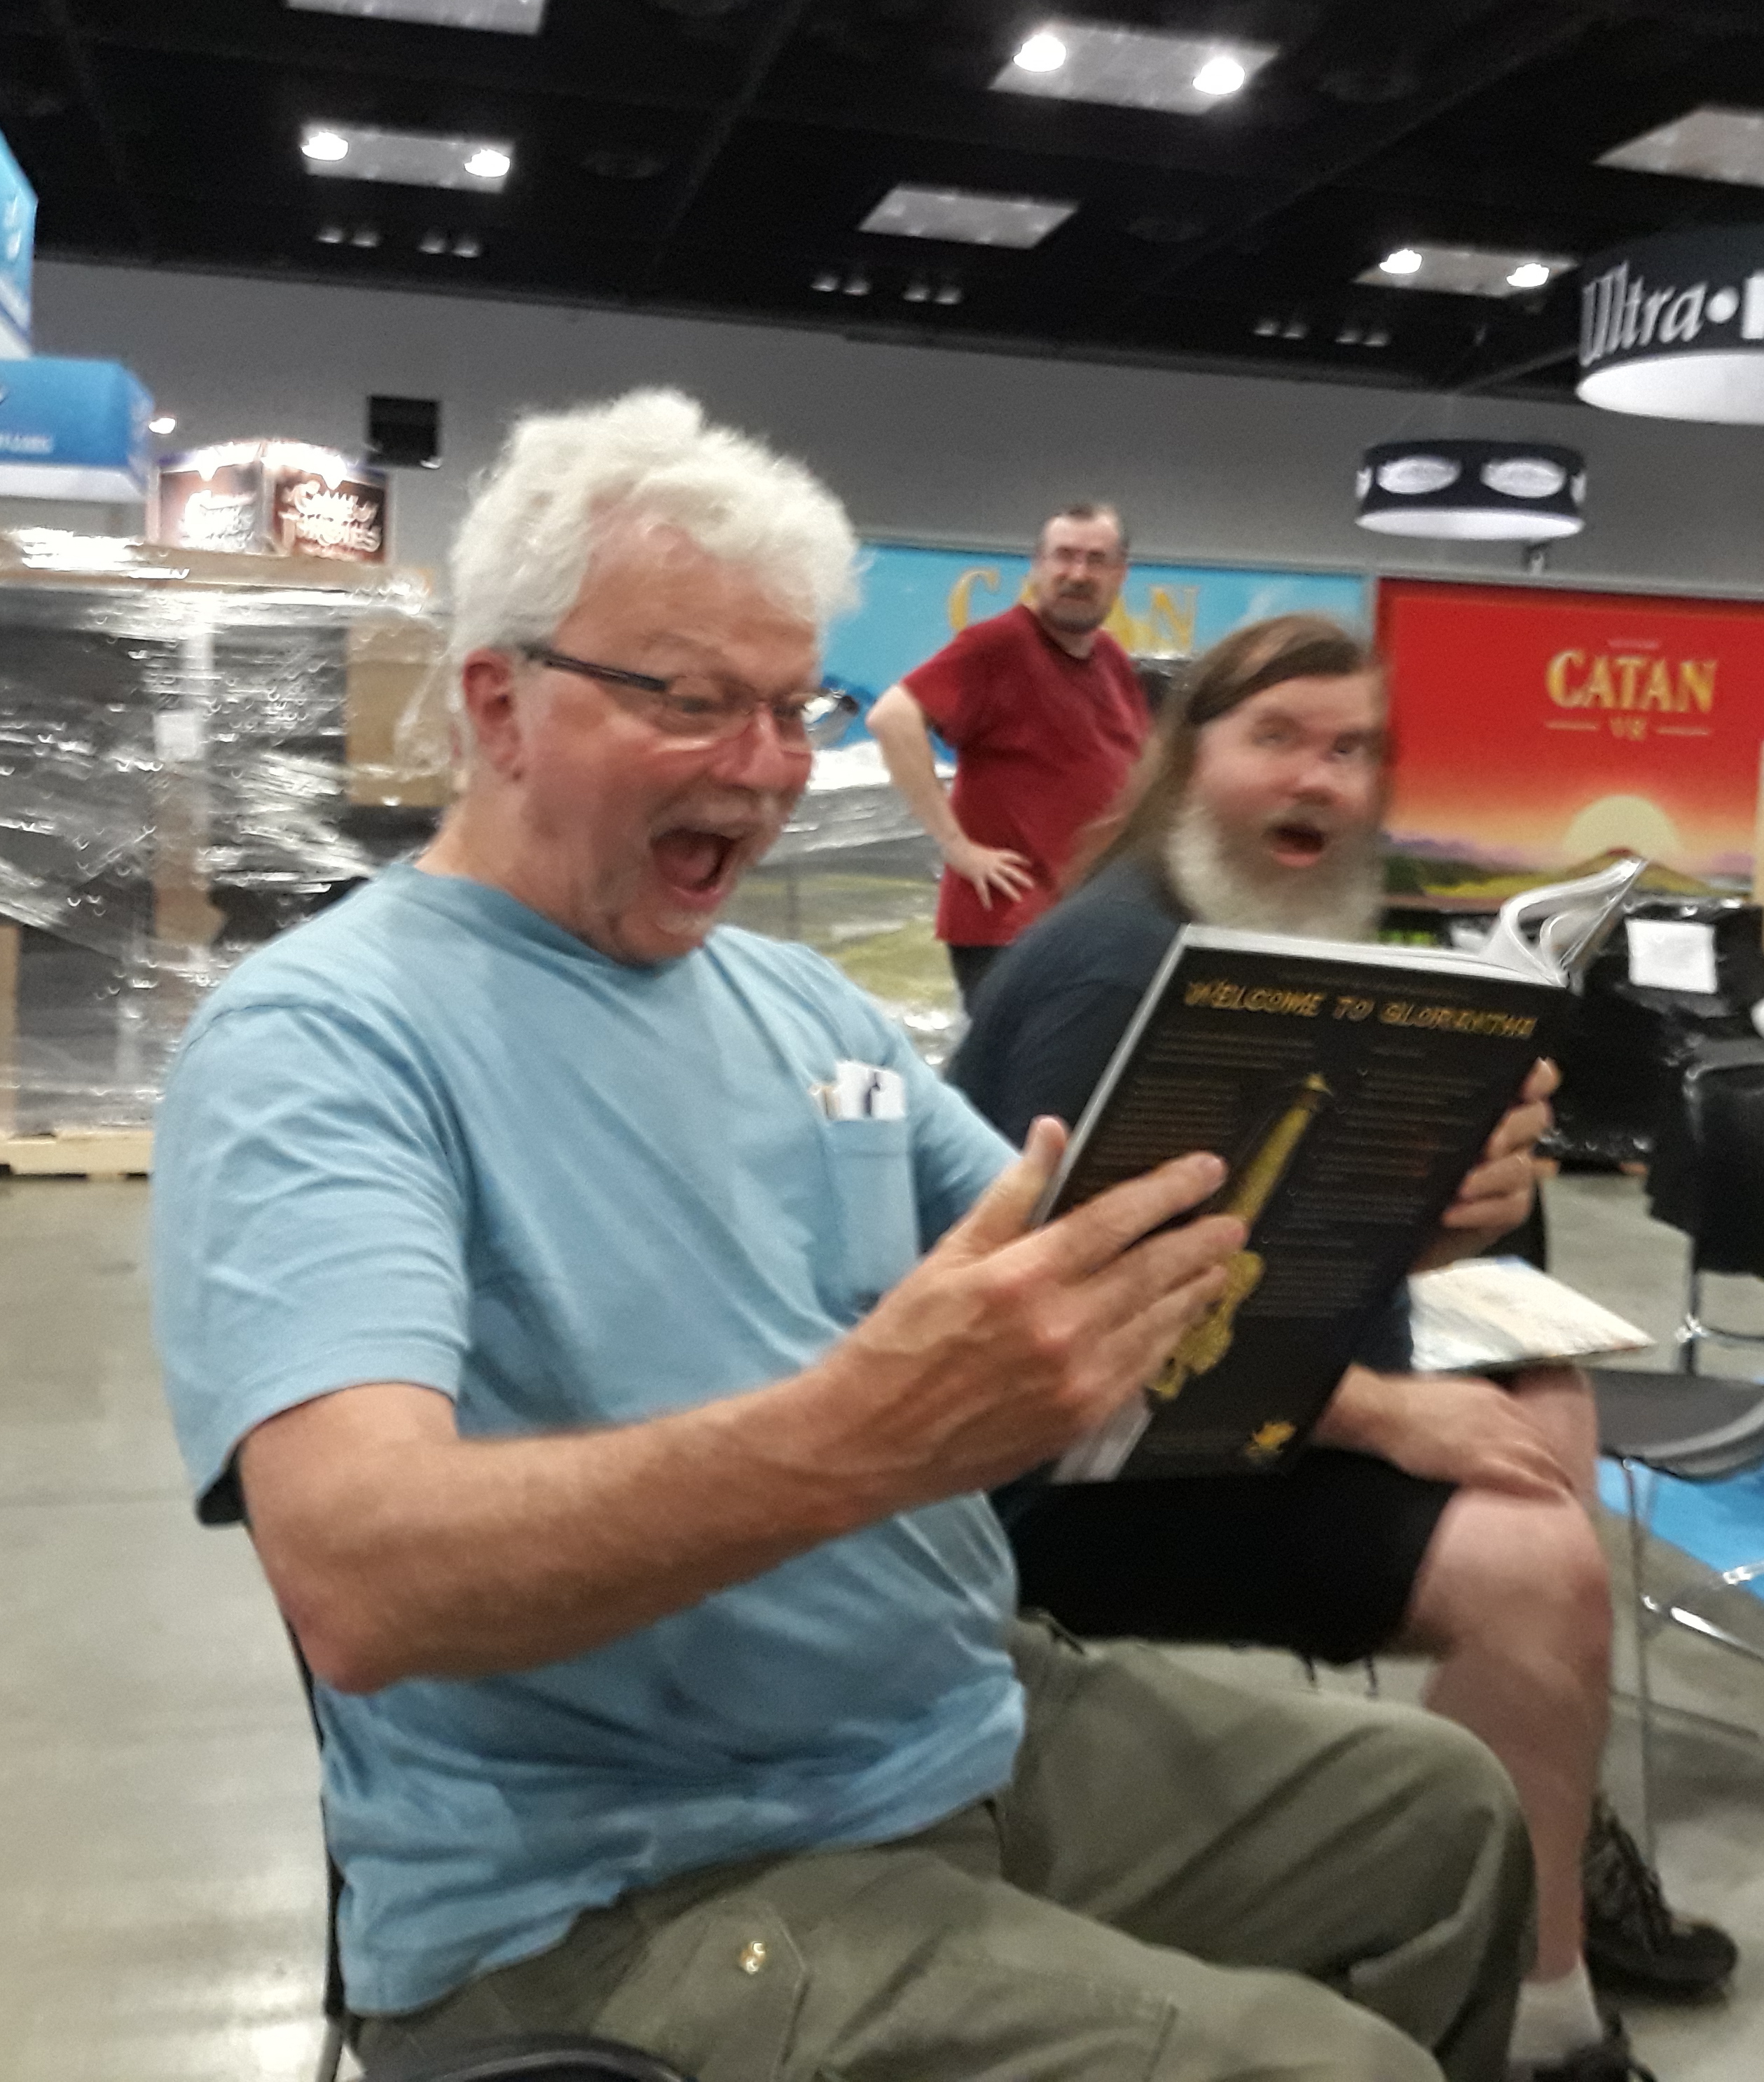 Greg Seeing RQG in Print for the First Time at Gen Con 2018